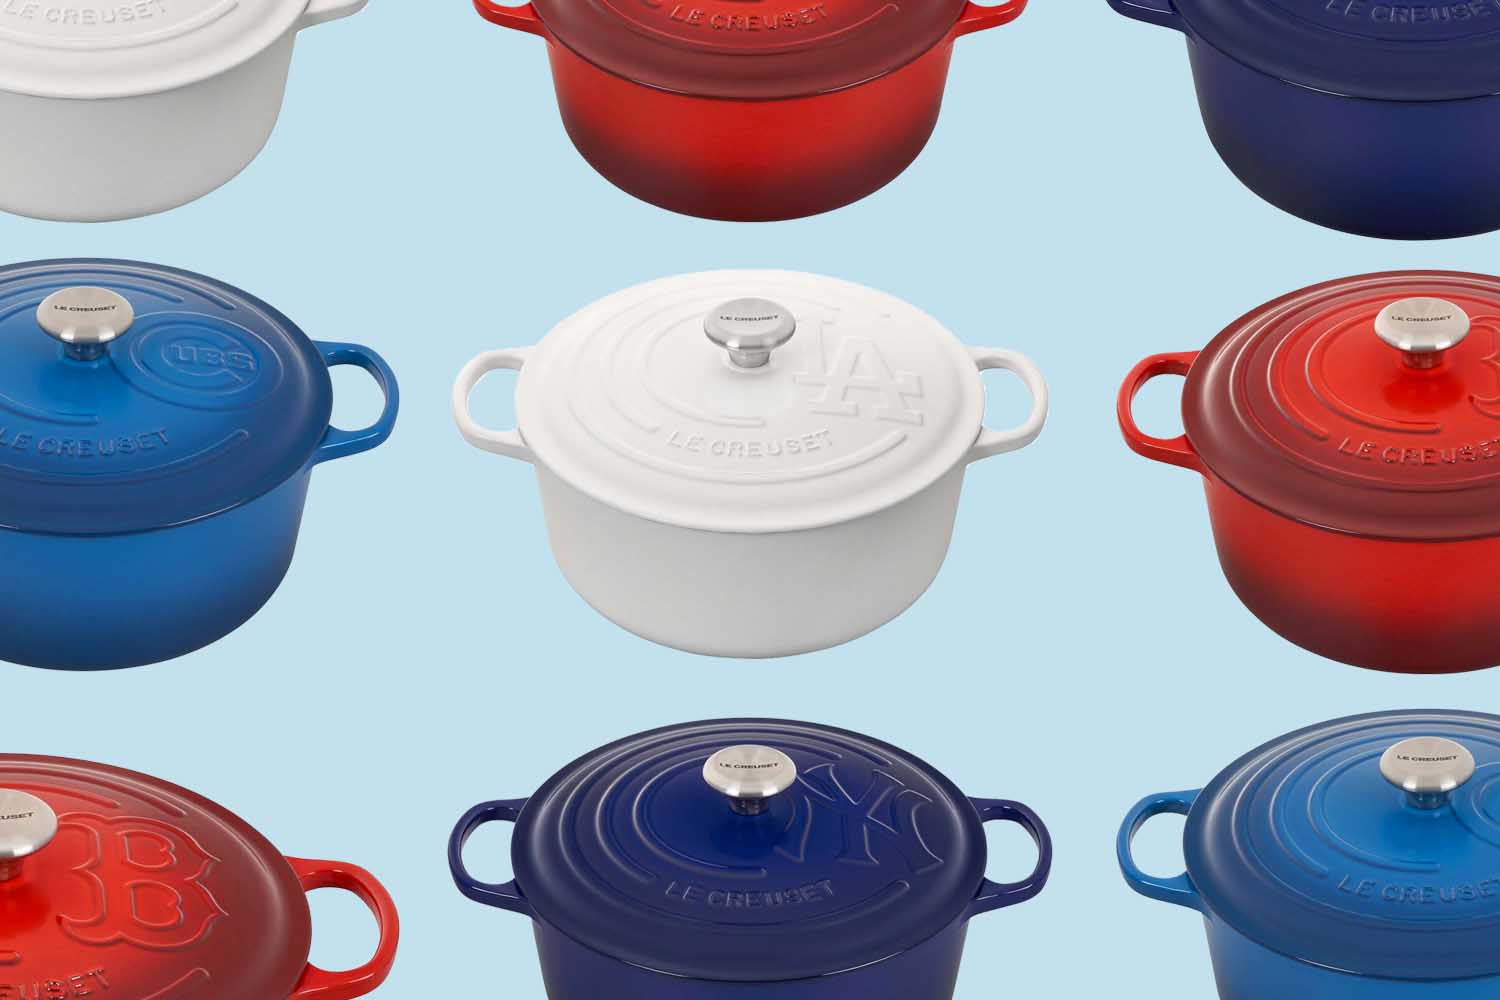 Cheer on Your Favorite MLB Team With a Signature Le Creuset Dutch Oven